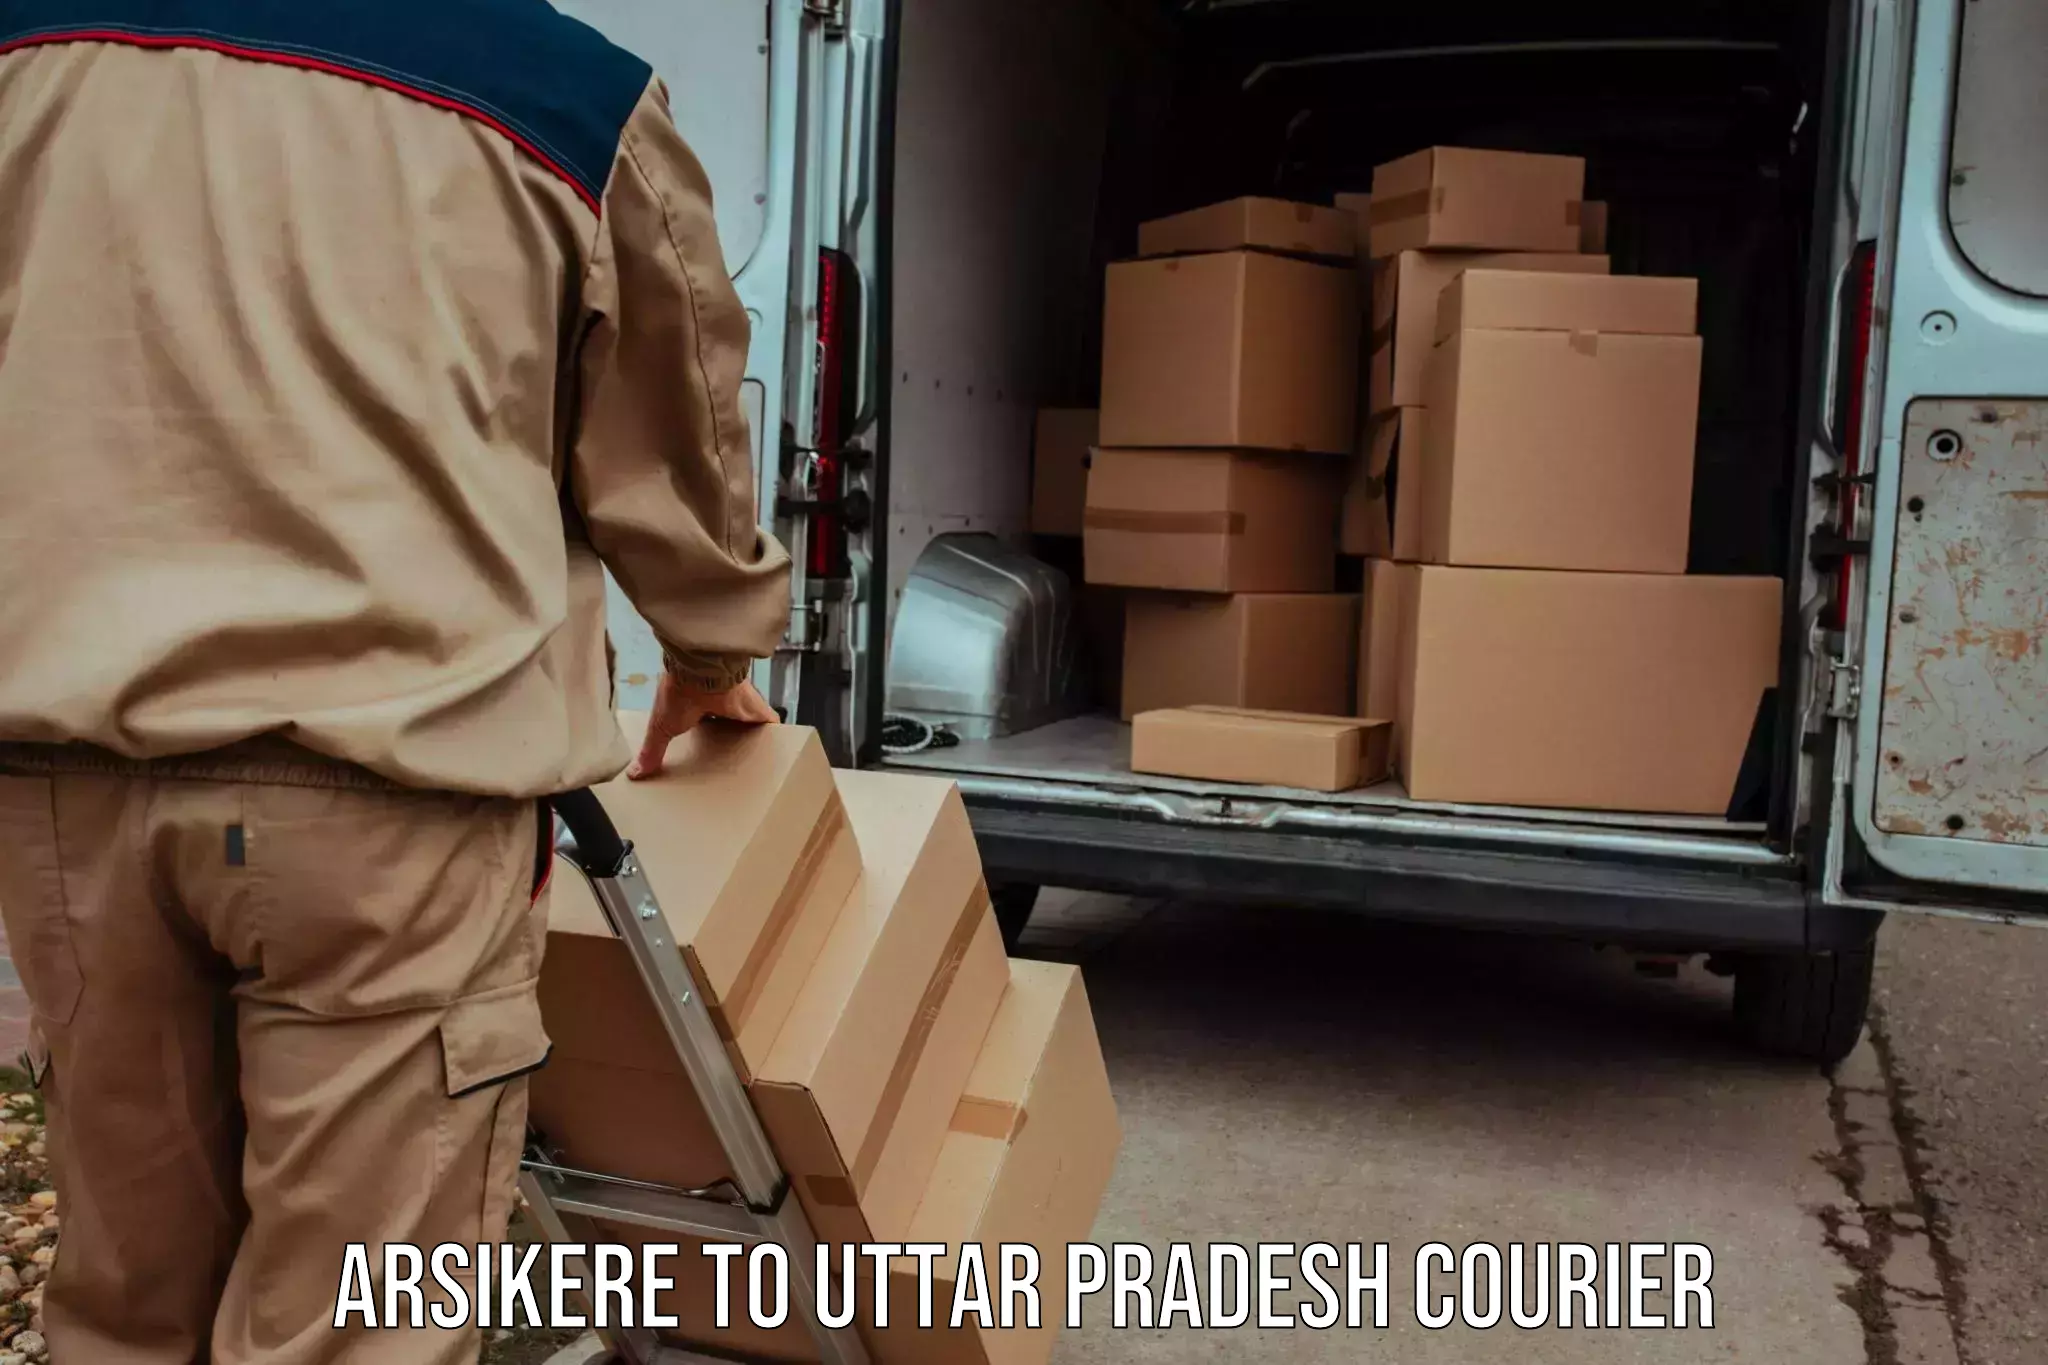 Multi-service courier options Arsikere to Saray Ankil